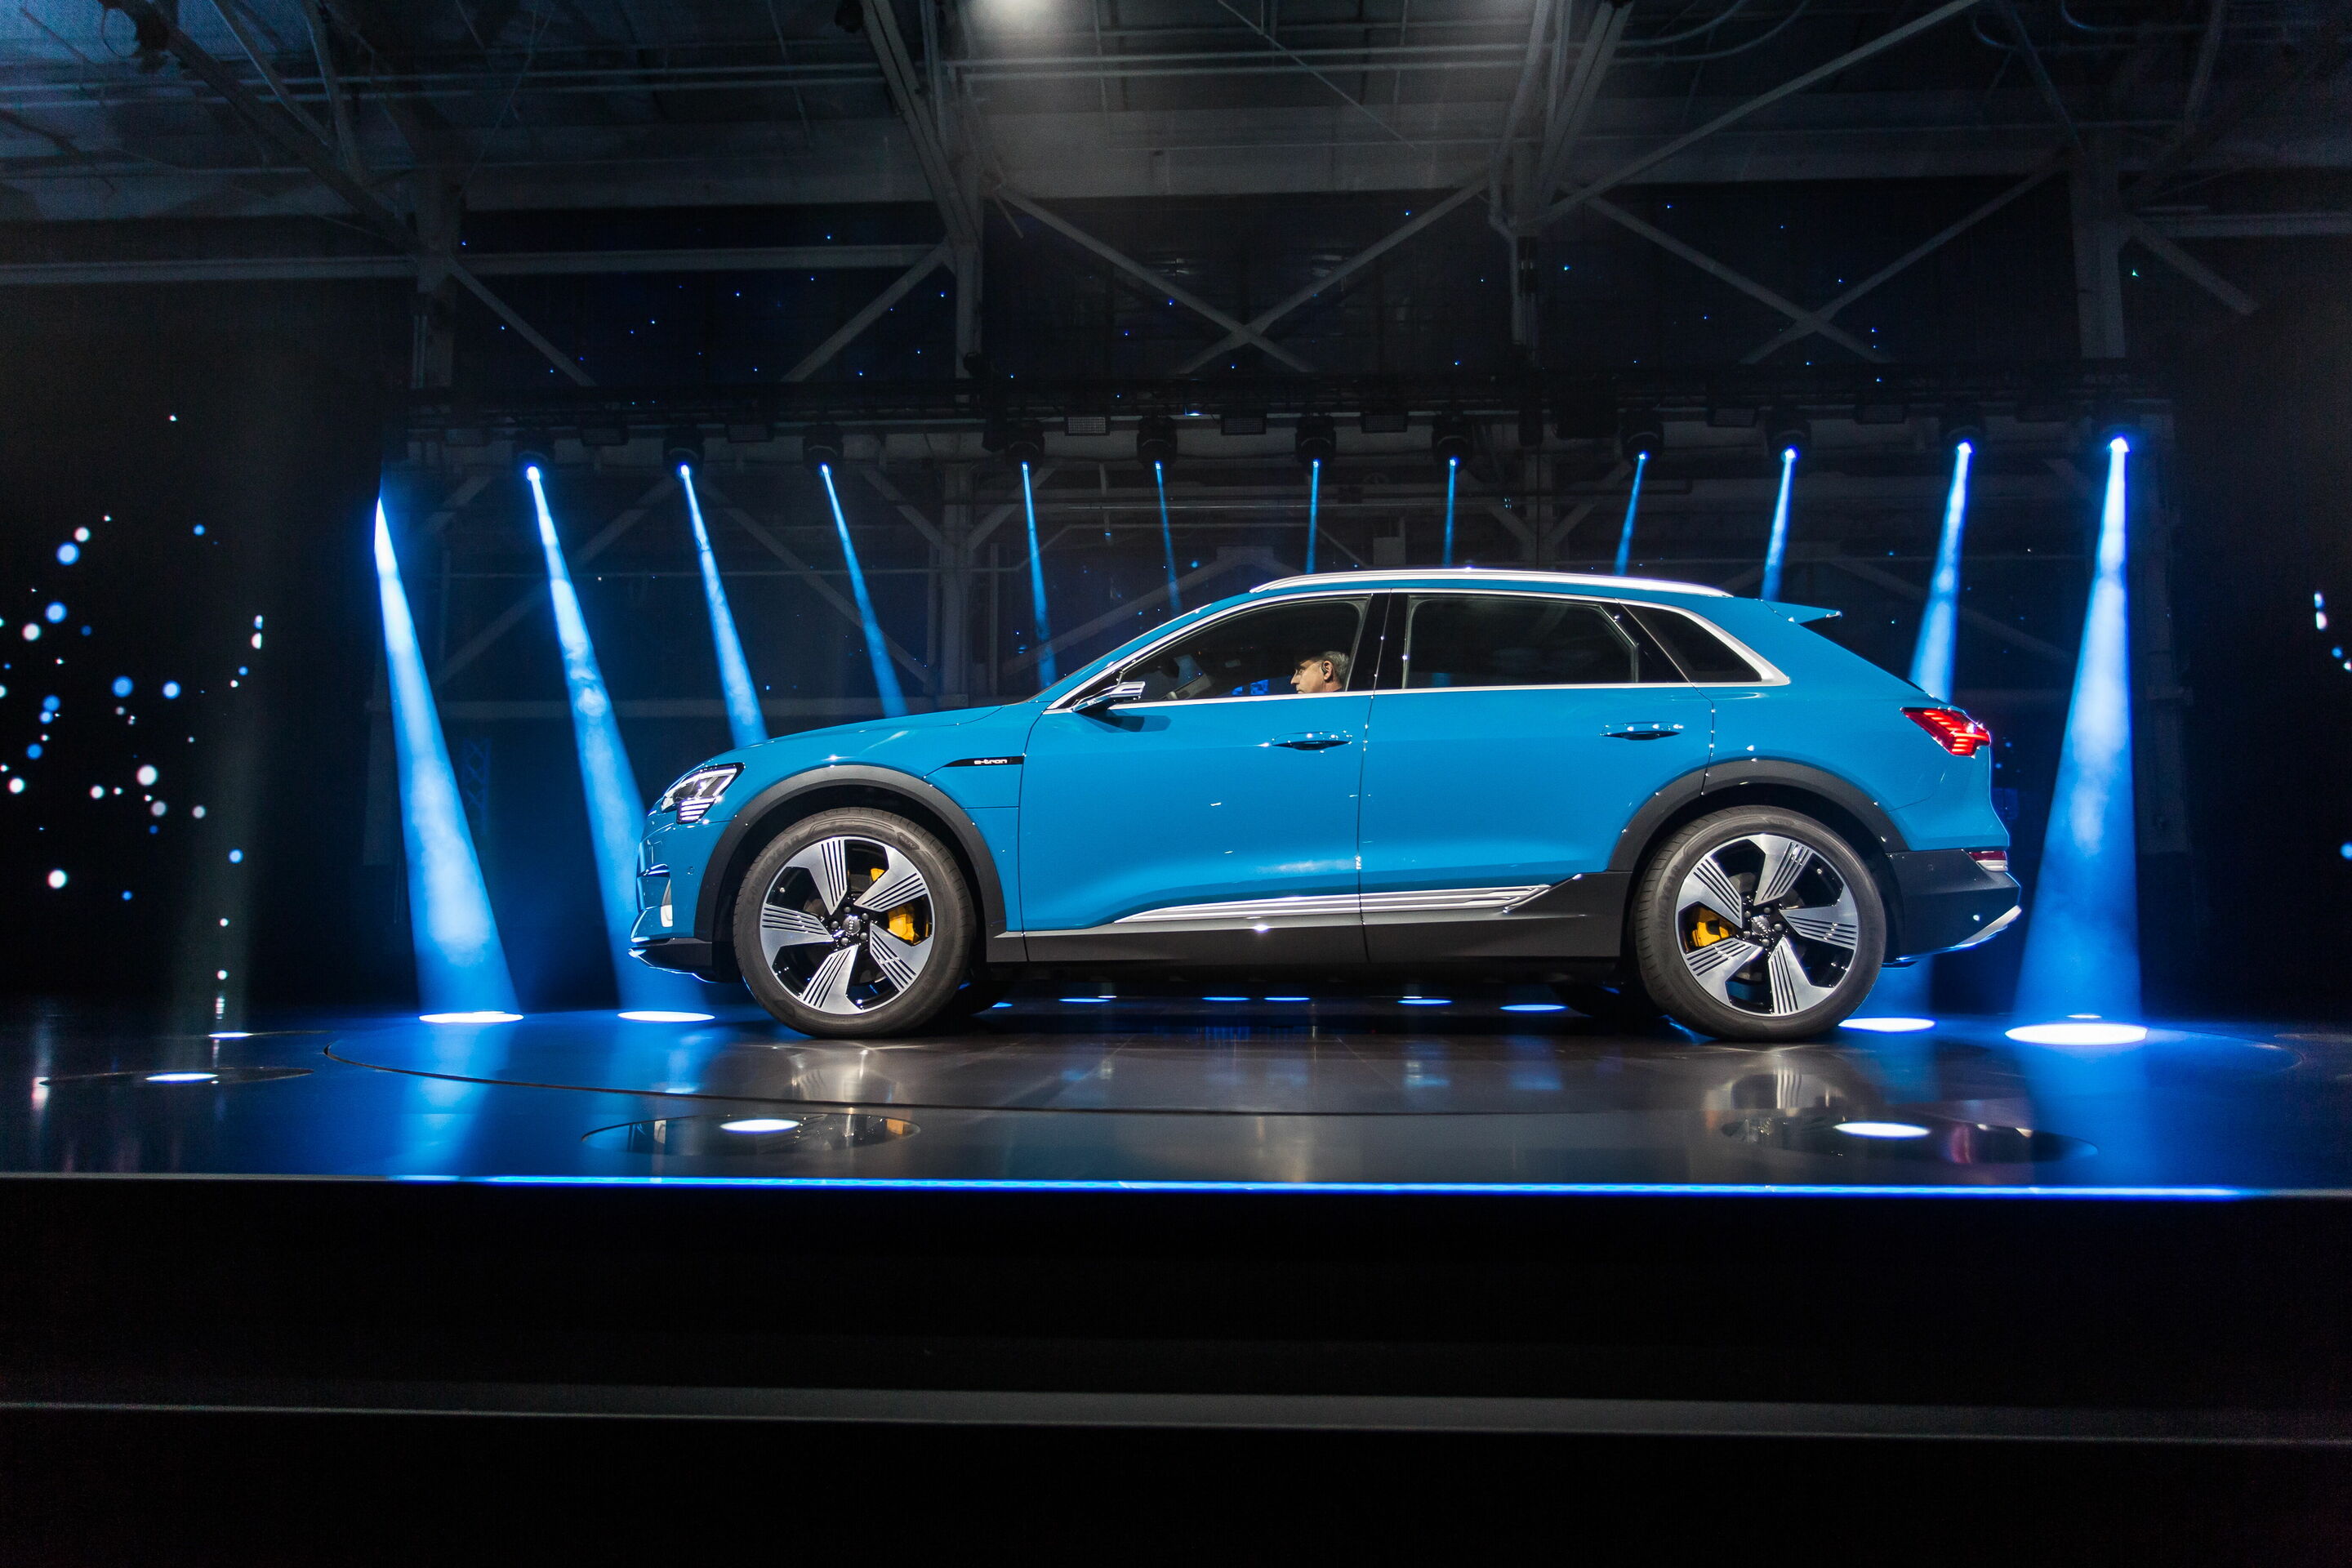 The Charge – world premiere of the Audi e-tron